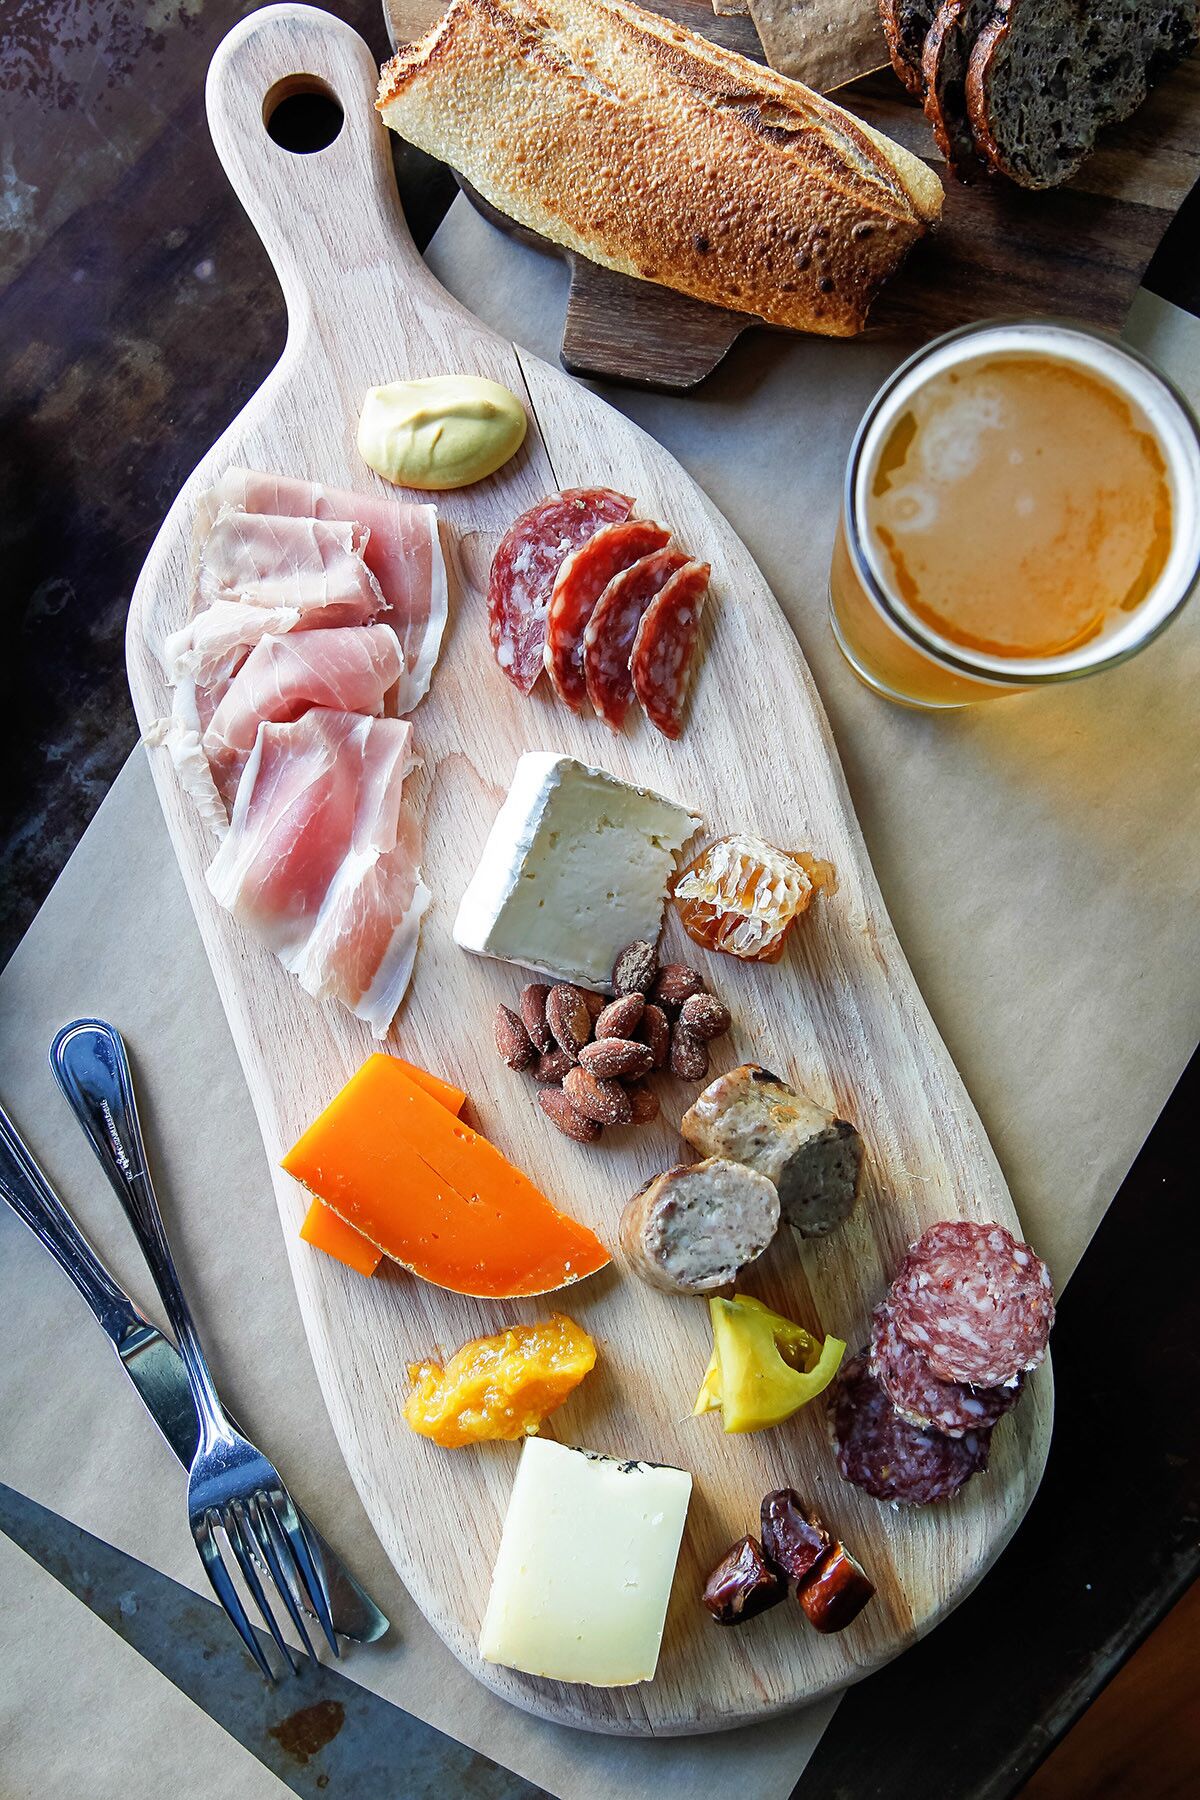 Executive Chef Joe Magnanelli at Cucina Urbana with his Charcuterie board with meats, cheeses and accompaniments in San Diego, California. (Eduardo Contreras/Union-Tribune)